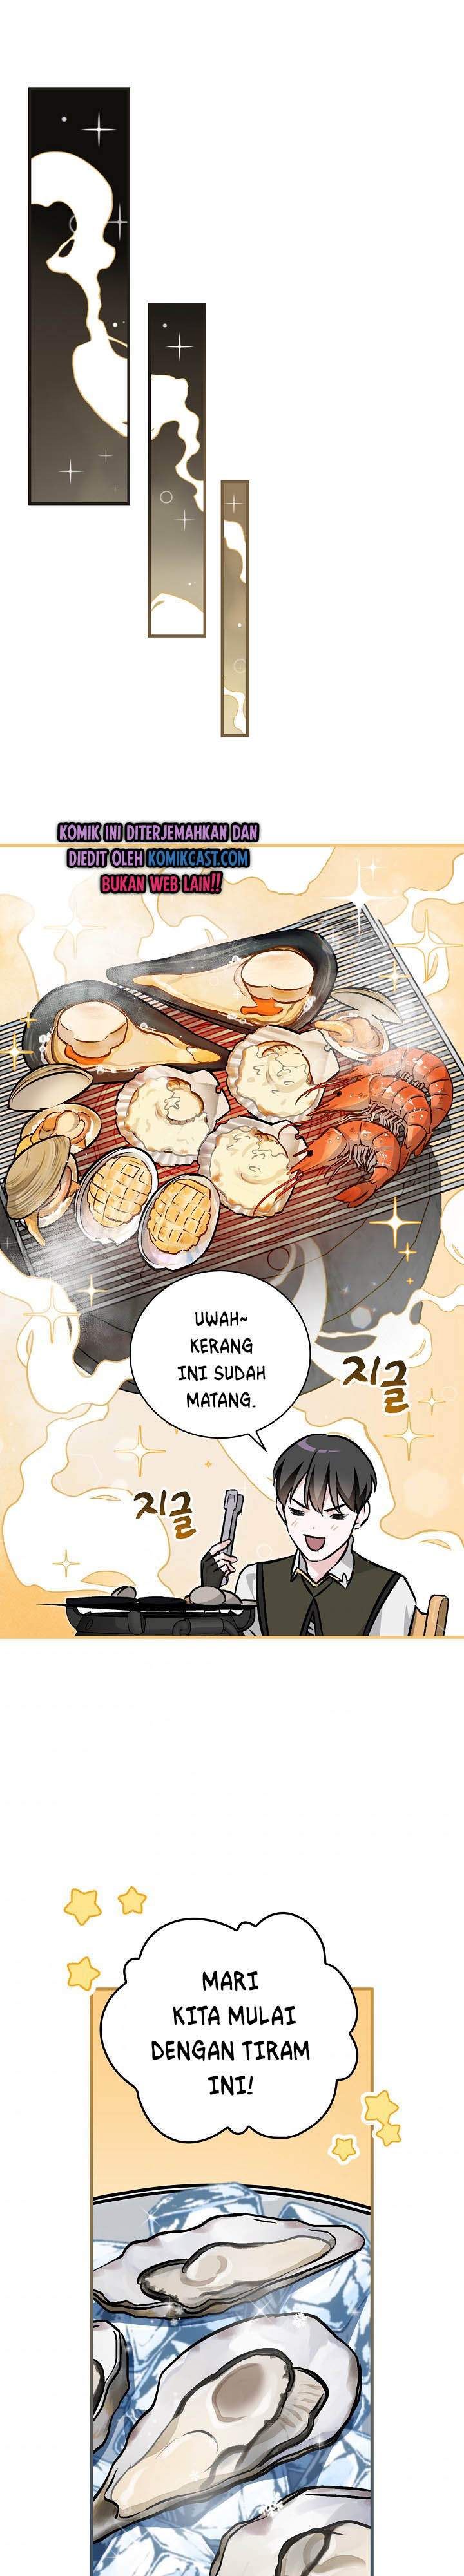 Leveling Up, By Only Eating! (Gourmet Gaming) Chapter 70 - 207